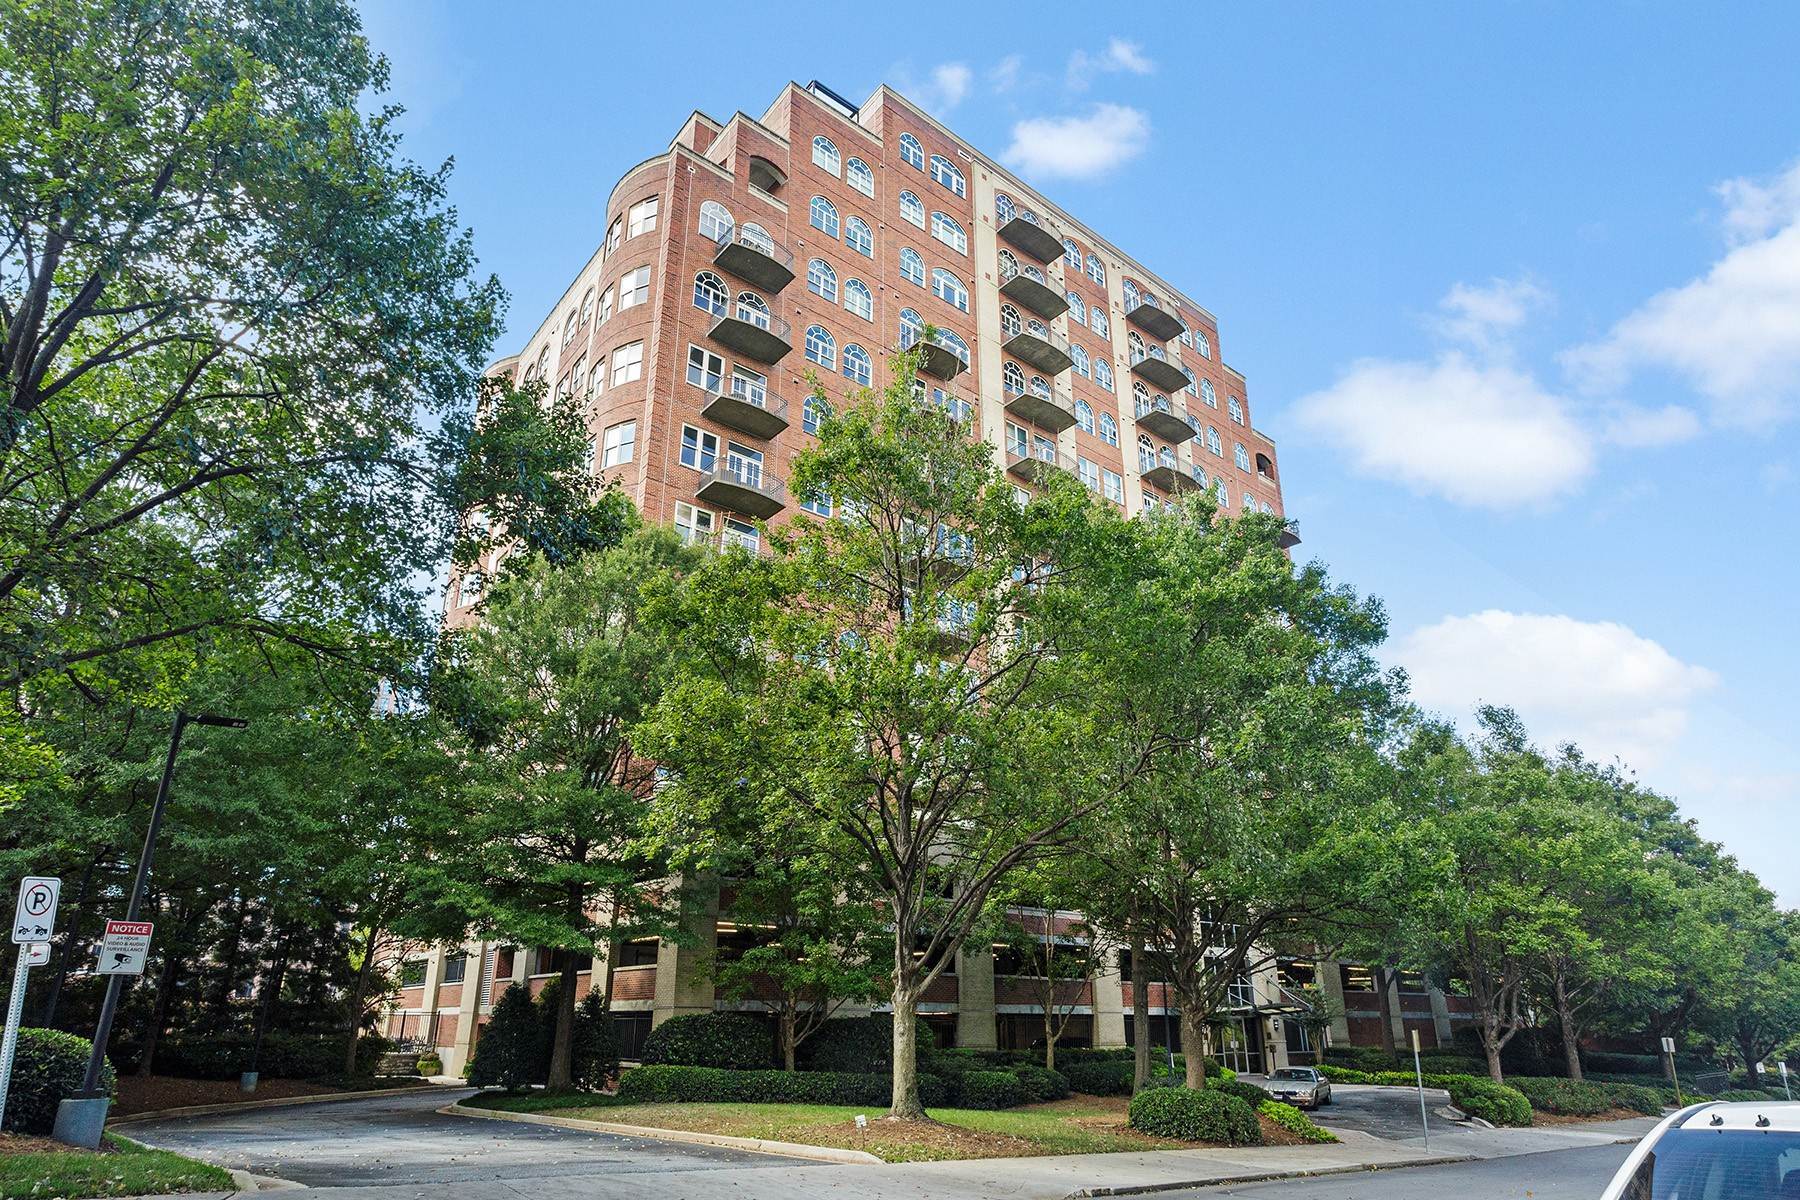 29. Condominiums for Sale at Incredible Opportunity To Acquire A Rare Patio Loft At Mathieson Exchange Lofts 3180 Mathieson Drive, No. 505 Atlanta, Georgia 30305 United States